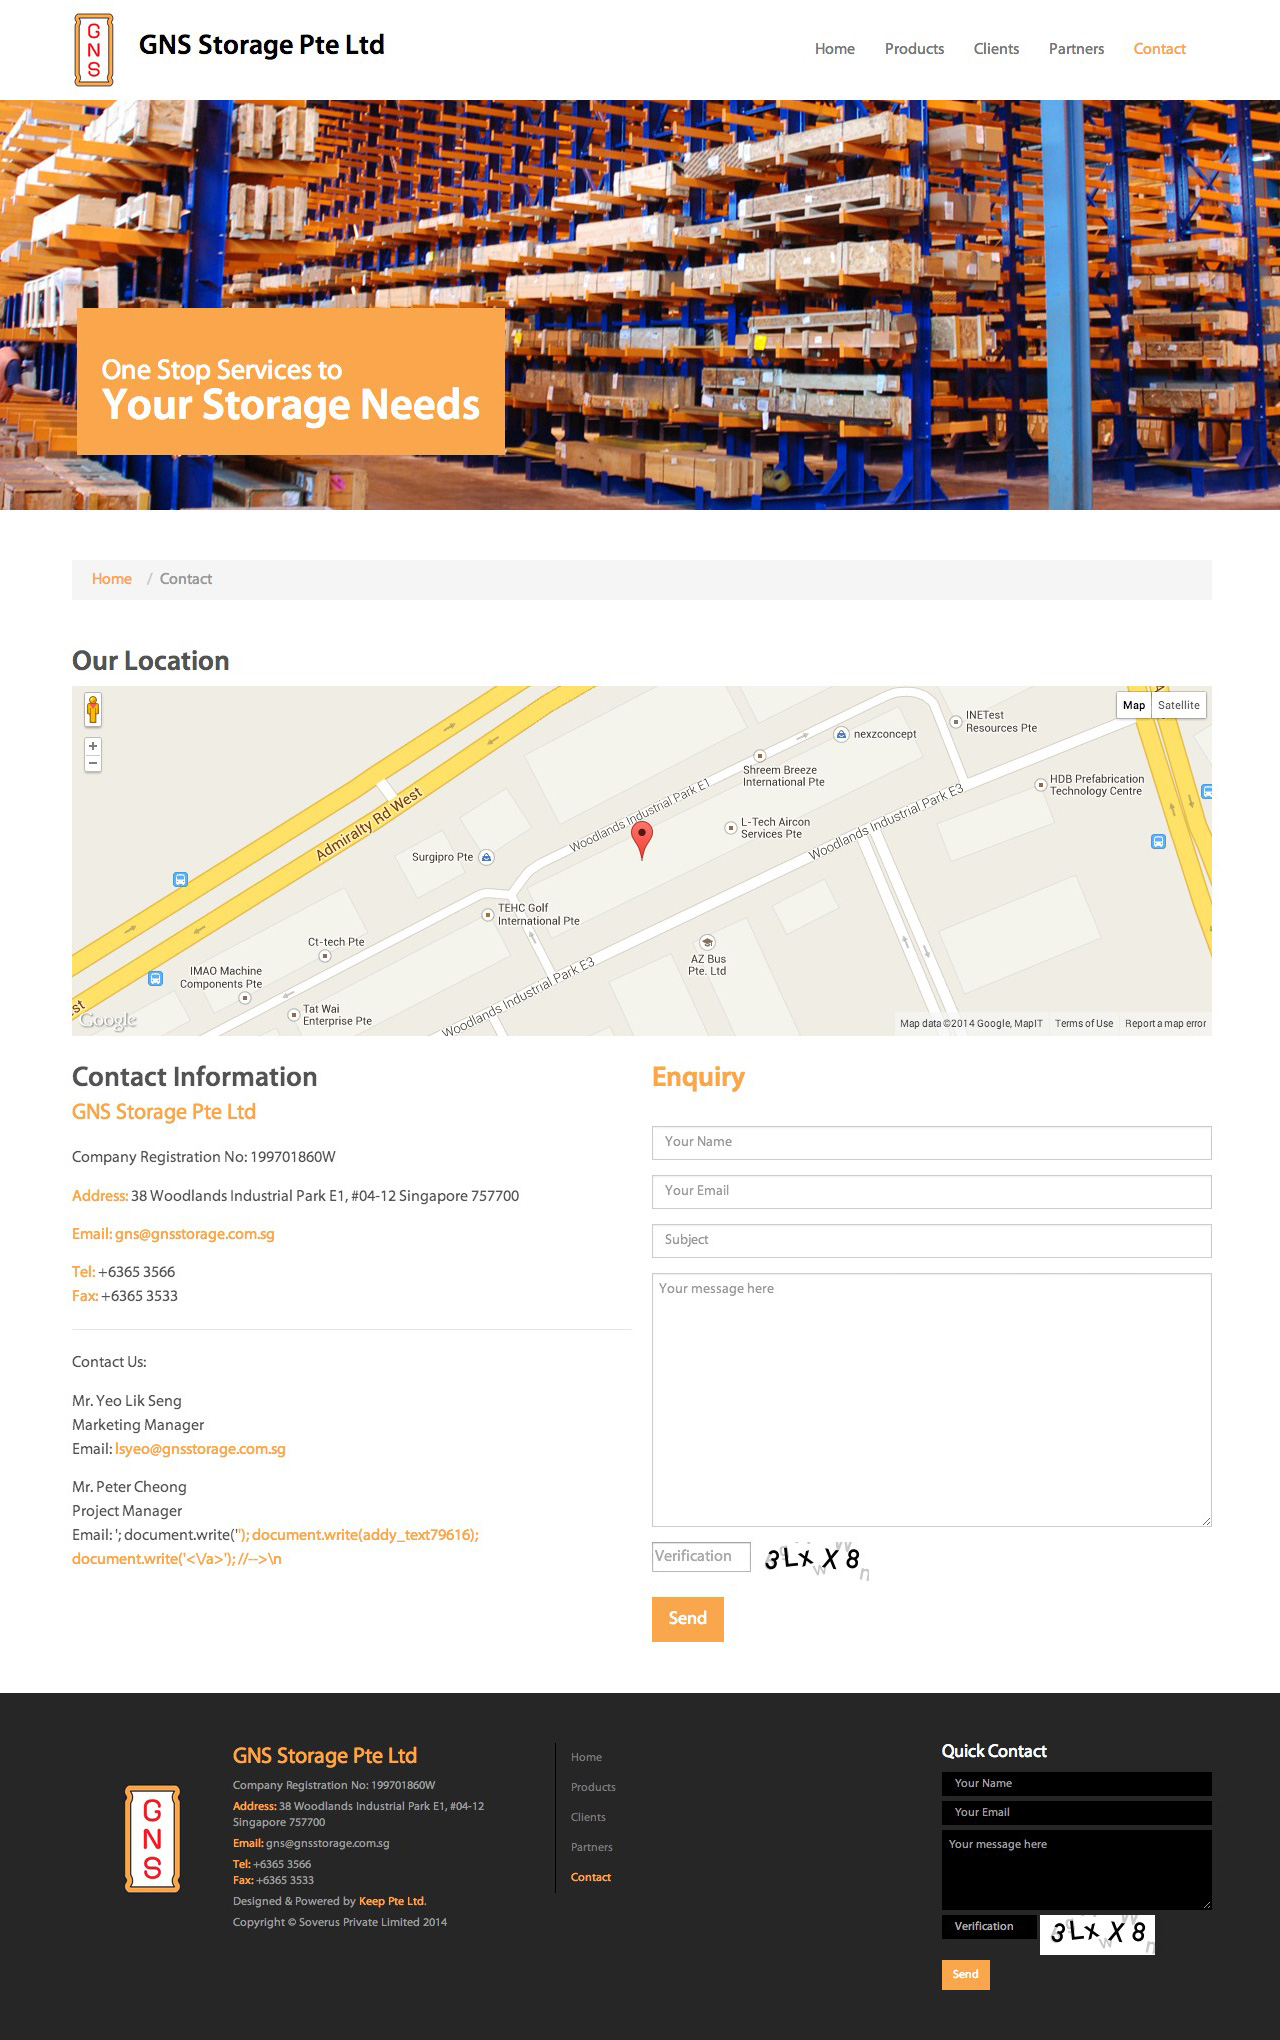 GNS Storage Pte Ltd website contact page